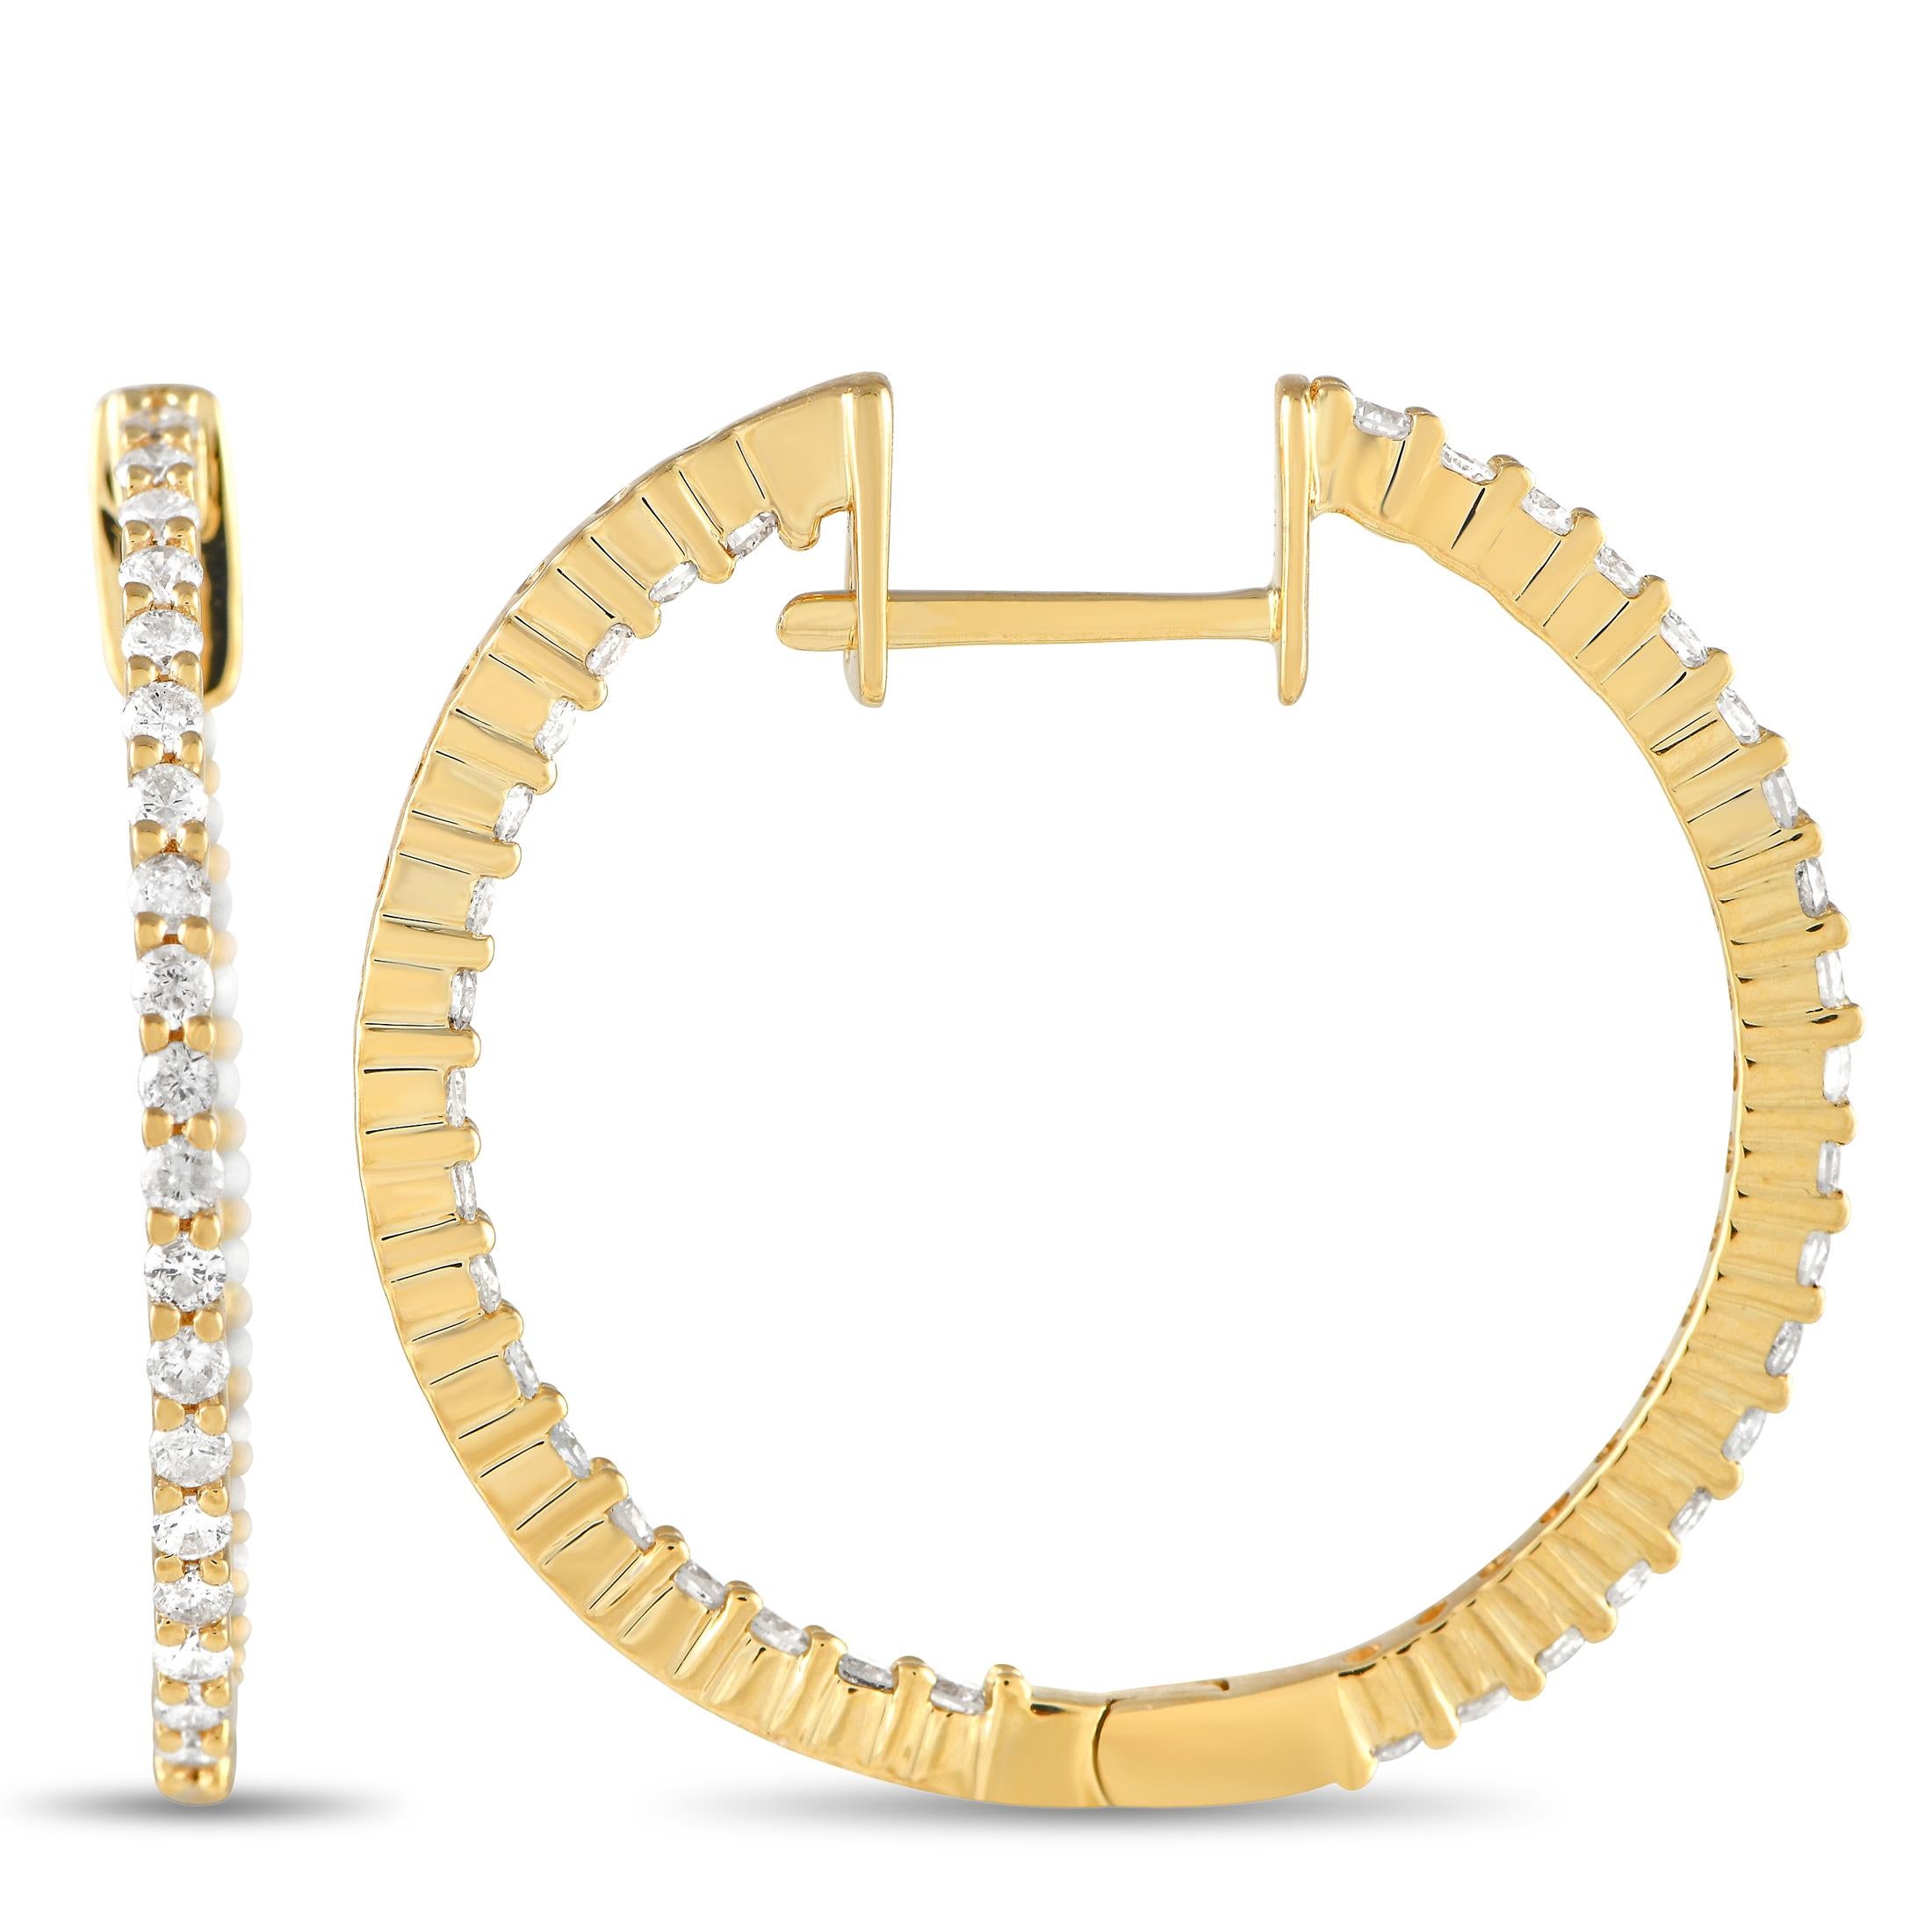 Here is a classy pair of hoops that will frame your face and bring just the right touch of sparkle to your wardrobe. The slim hoops are fashioned in 14K yellow gold and feature bright white diamonds in shared prongs. The sparkling gems line the